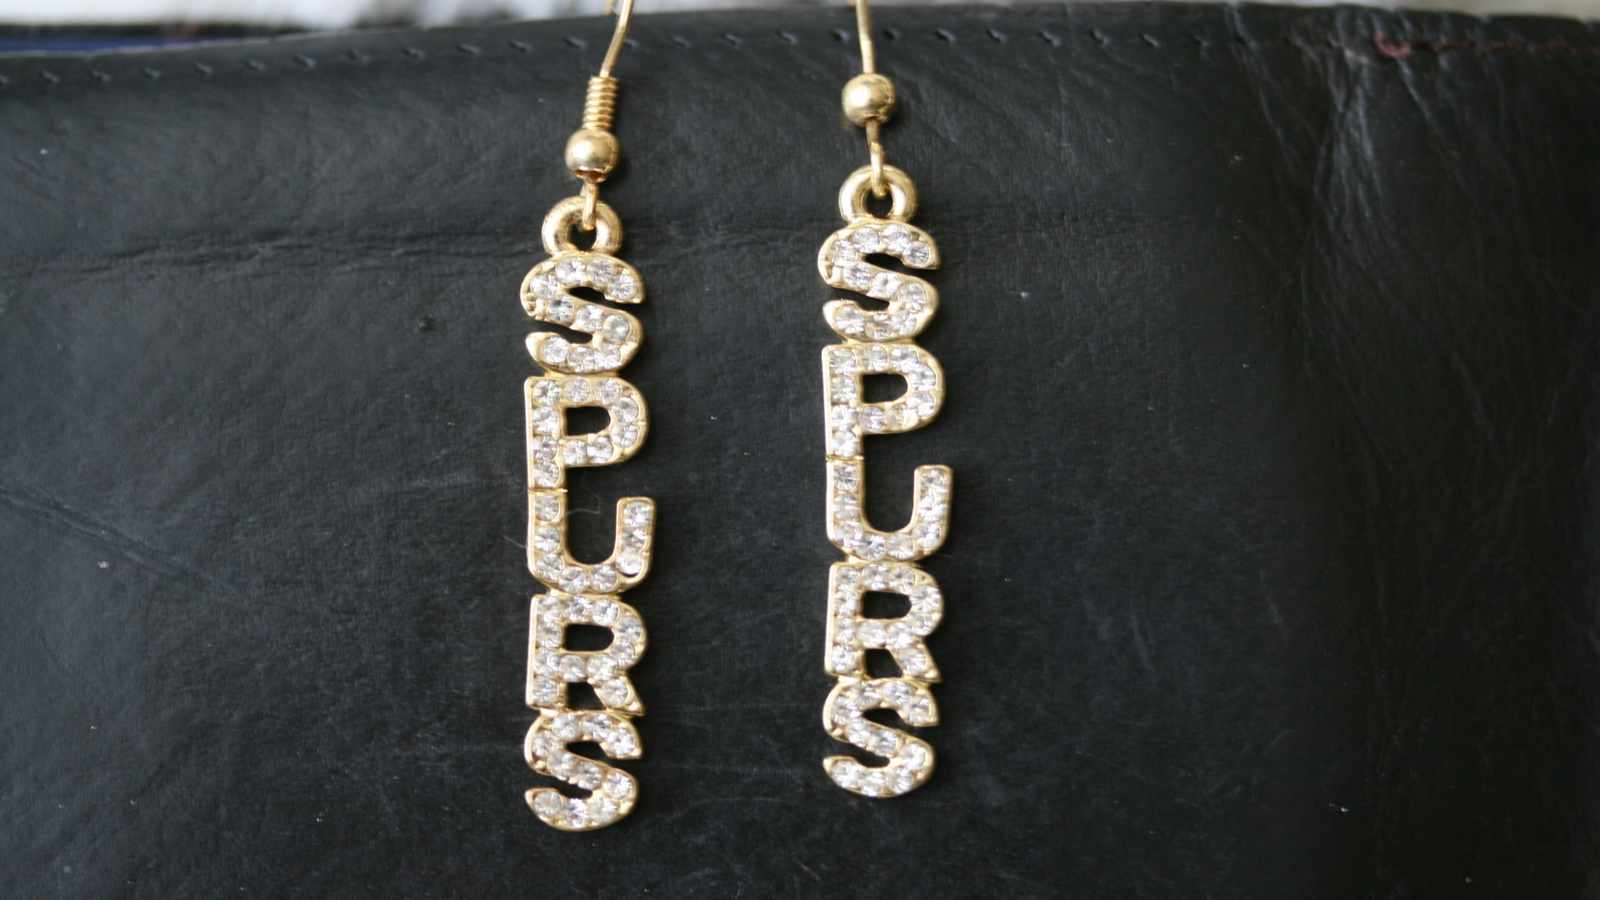 Primary image for San Antonio SPURS Earrings  Rhinestone Word SPURS Earrings. SPURS Dangle Earring